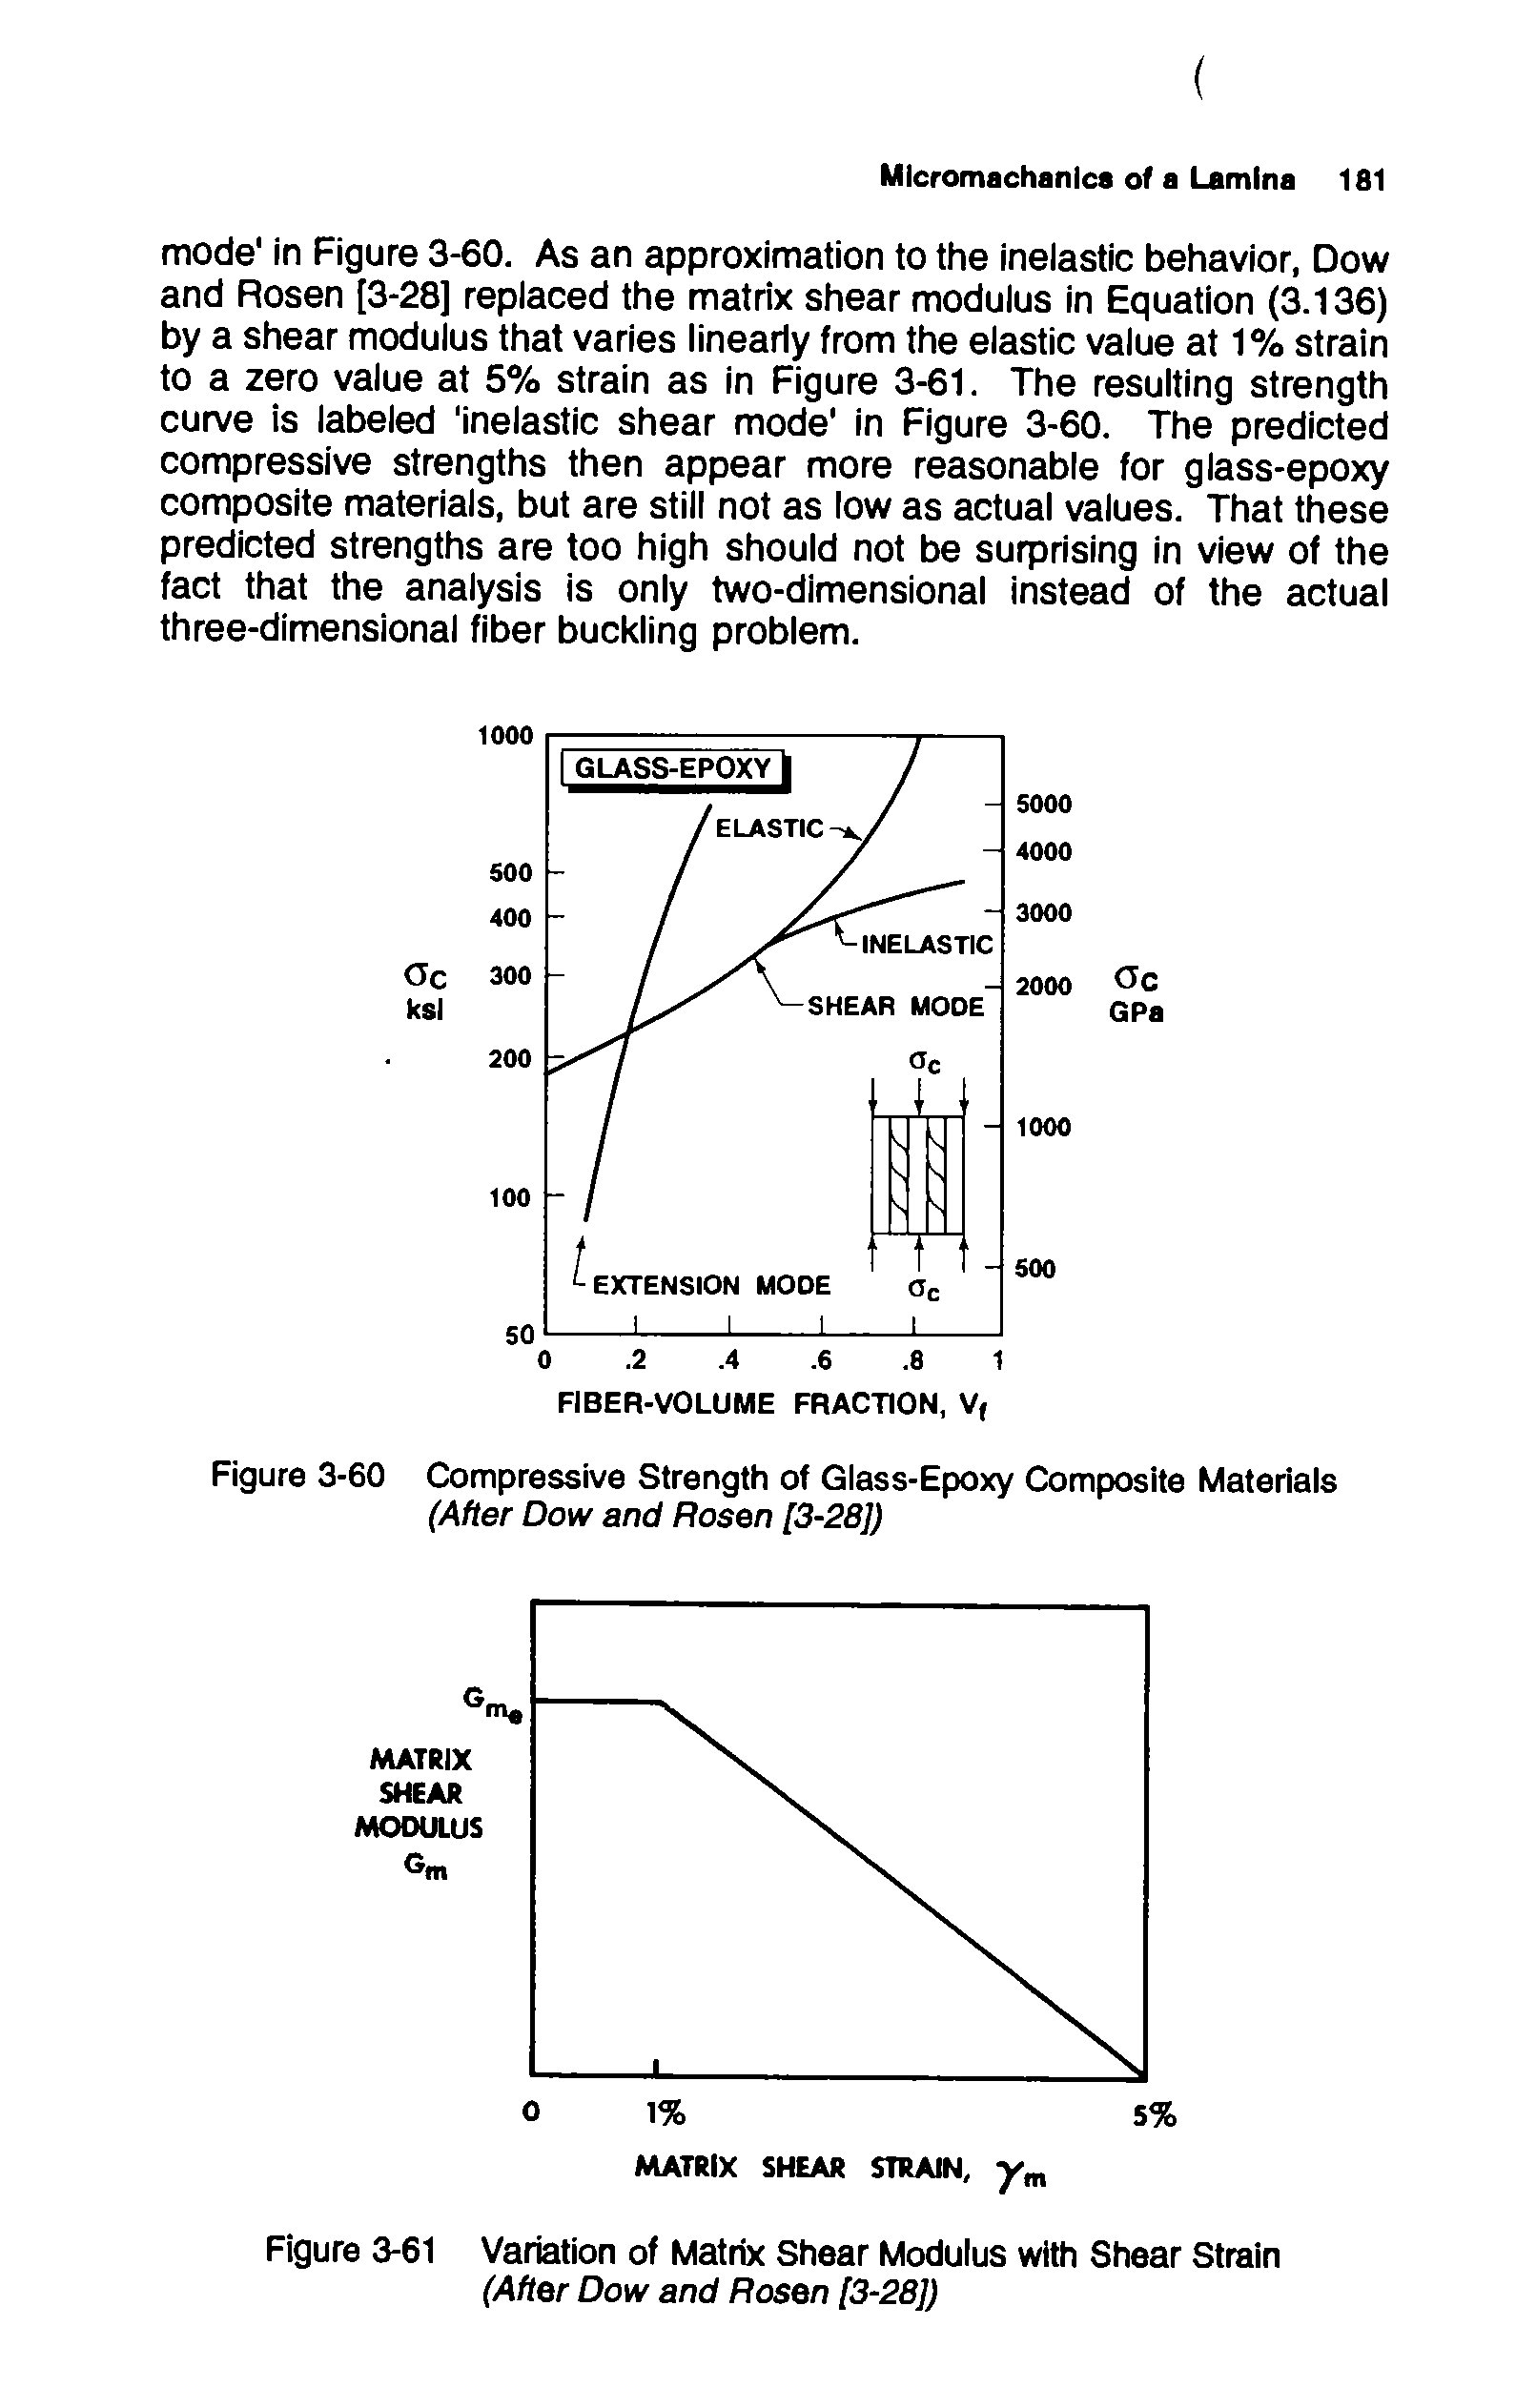 Figure 3-60 Compressive Strength of Glass-Epoxy Composite Materials (After Dow and Rosen [3-28])...